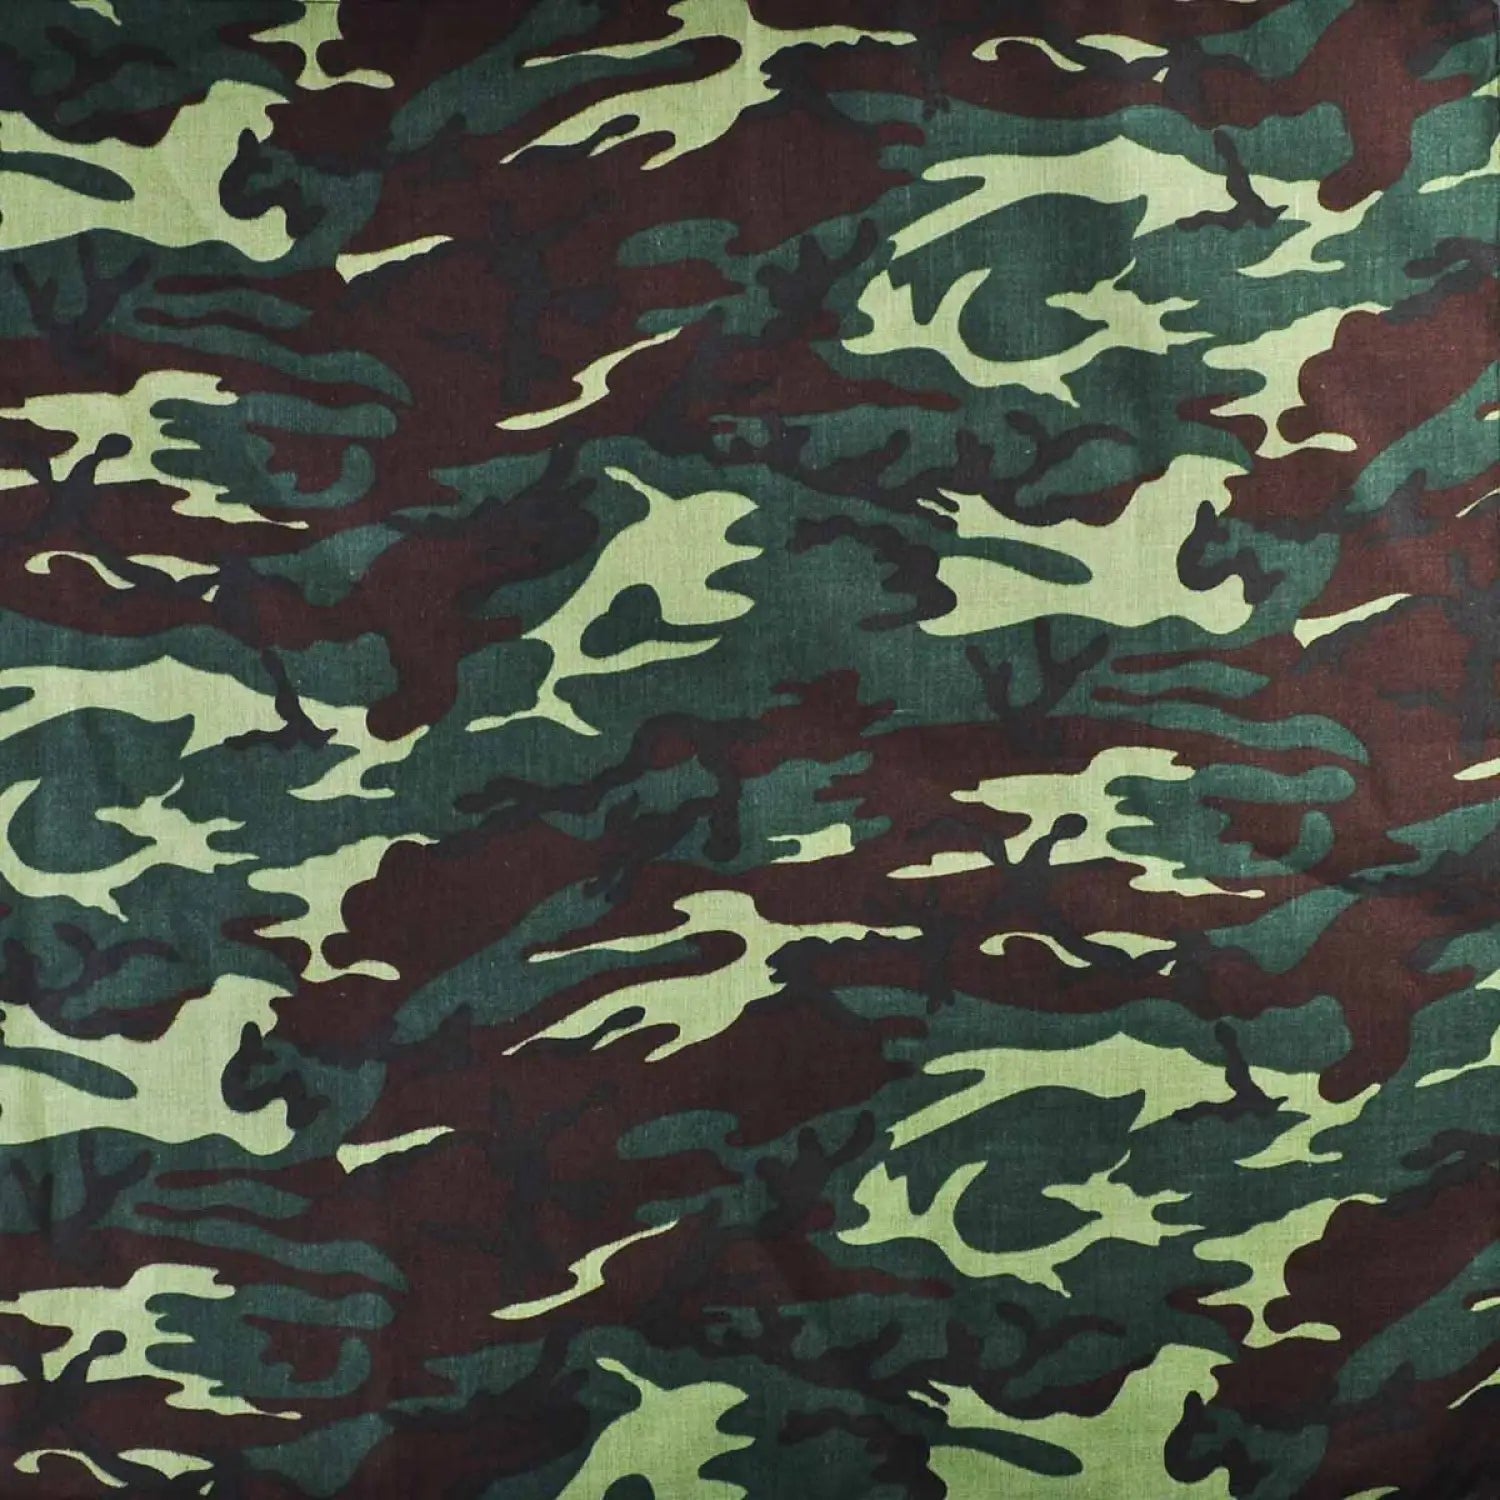 Camouflage military print bandana with green and brown design.